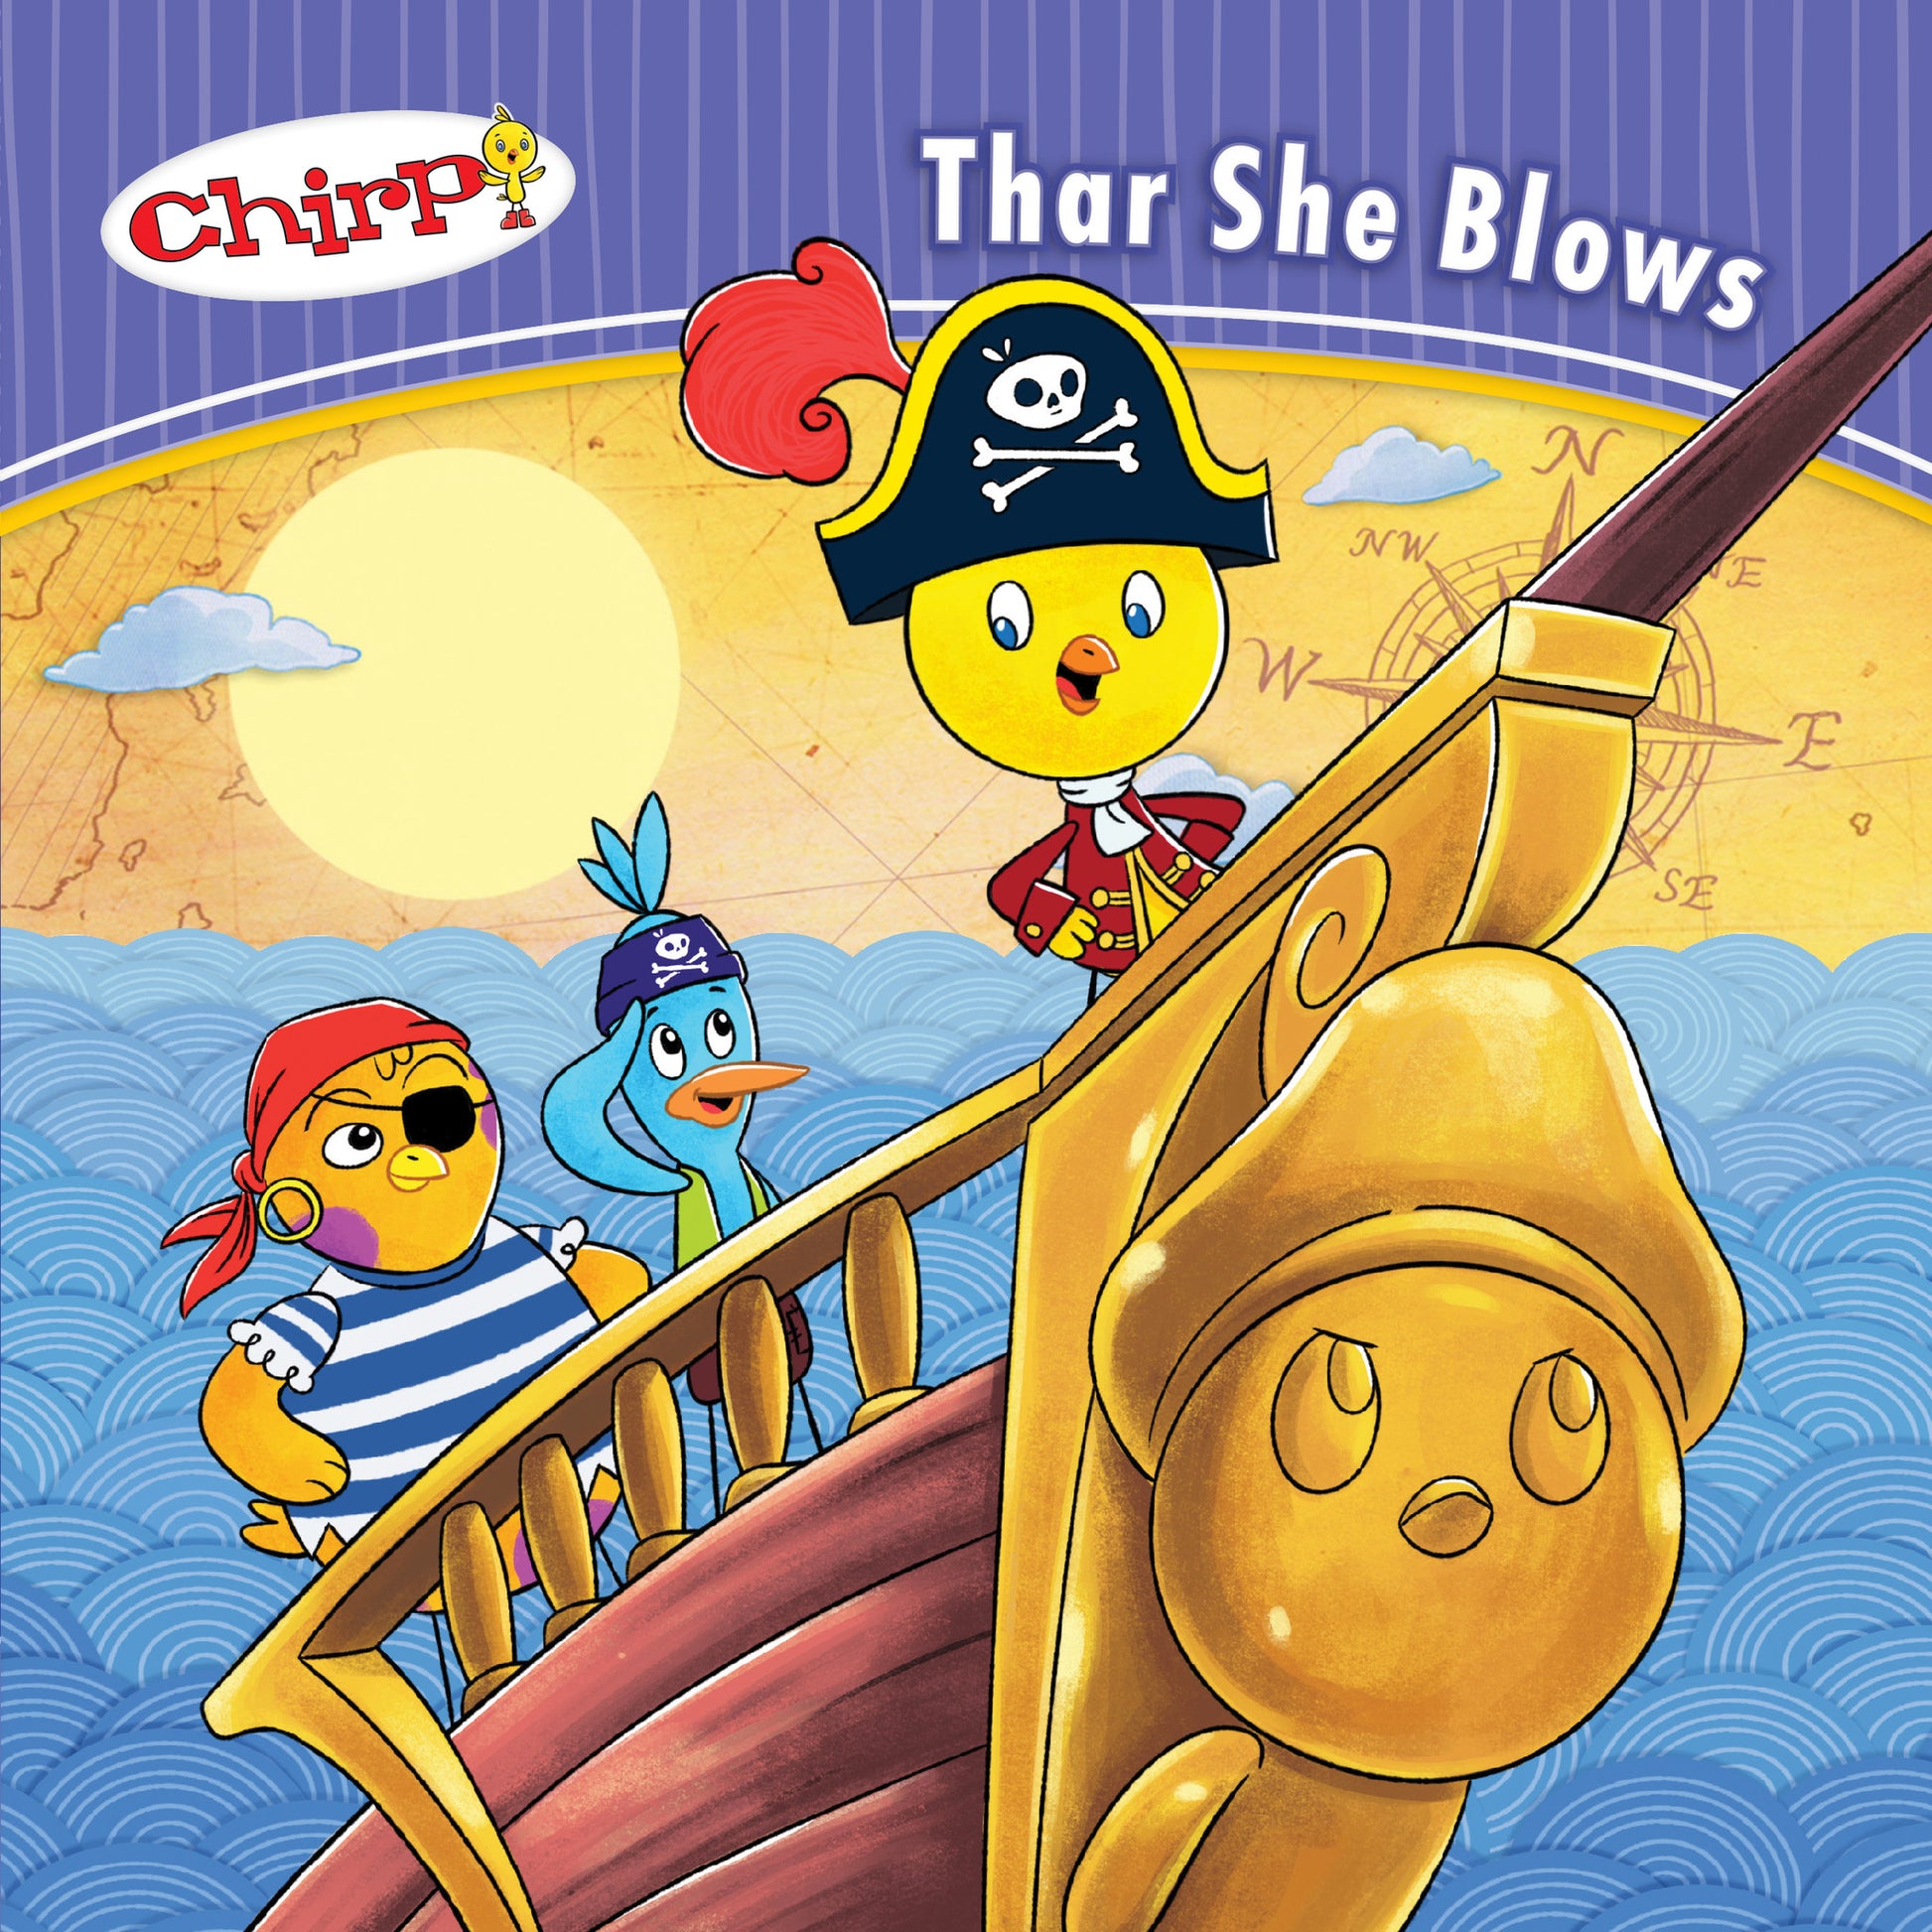 Chirp: Thar She Blows - Owlkids - Reading for kids and literacy resources for parents made fun. Books helping kids to learn.